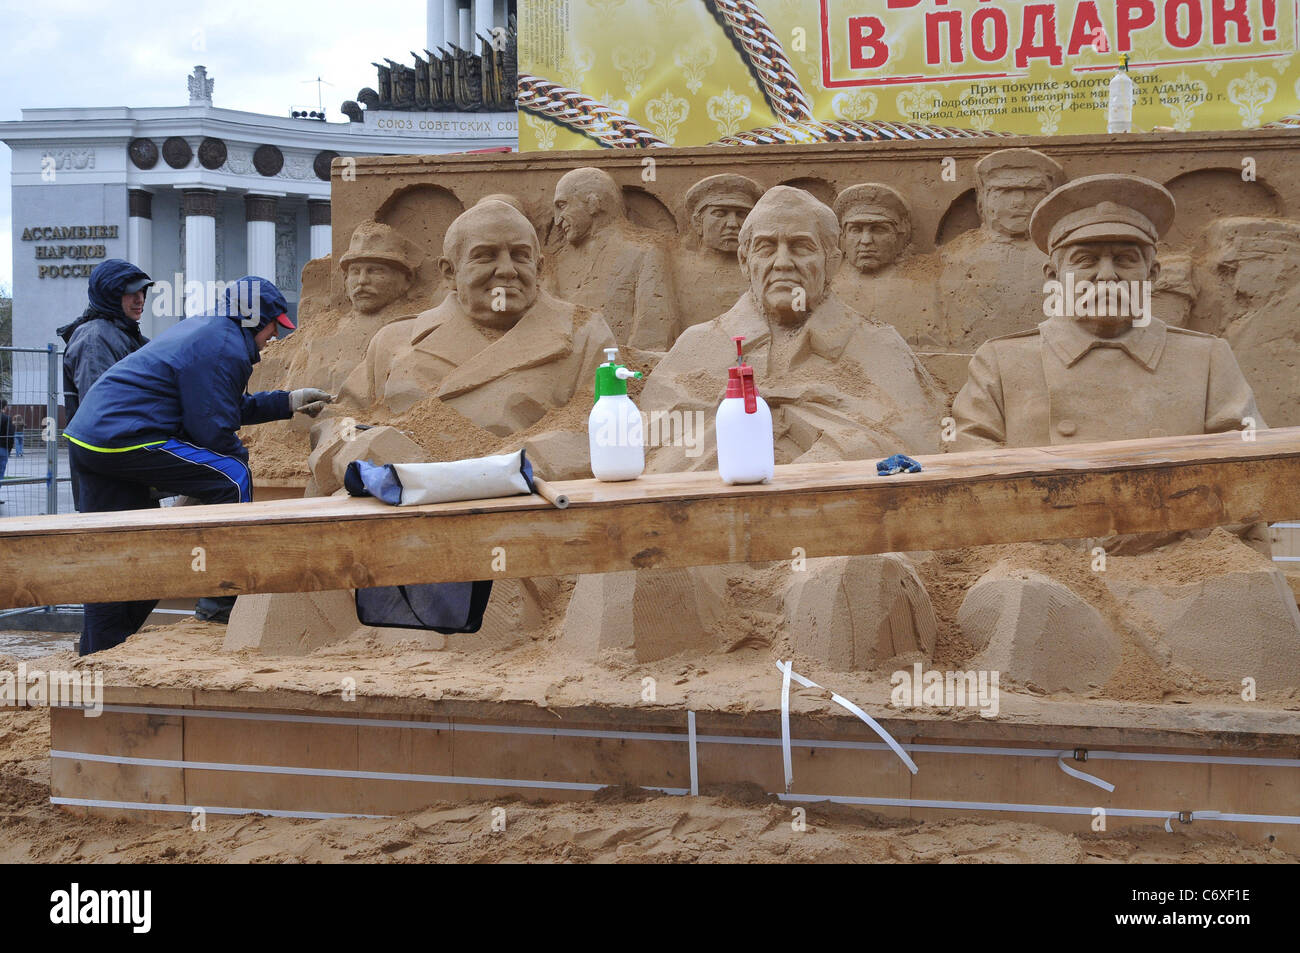 Historical WW2 moment sculpted from sand The historical meeting of The Big Three at the Yalta Conference during World War II Stock Photo